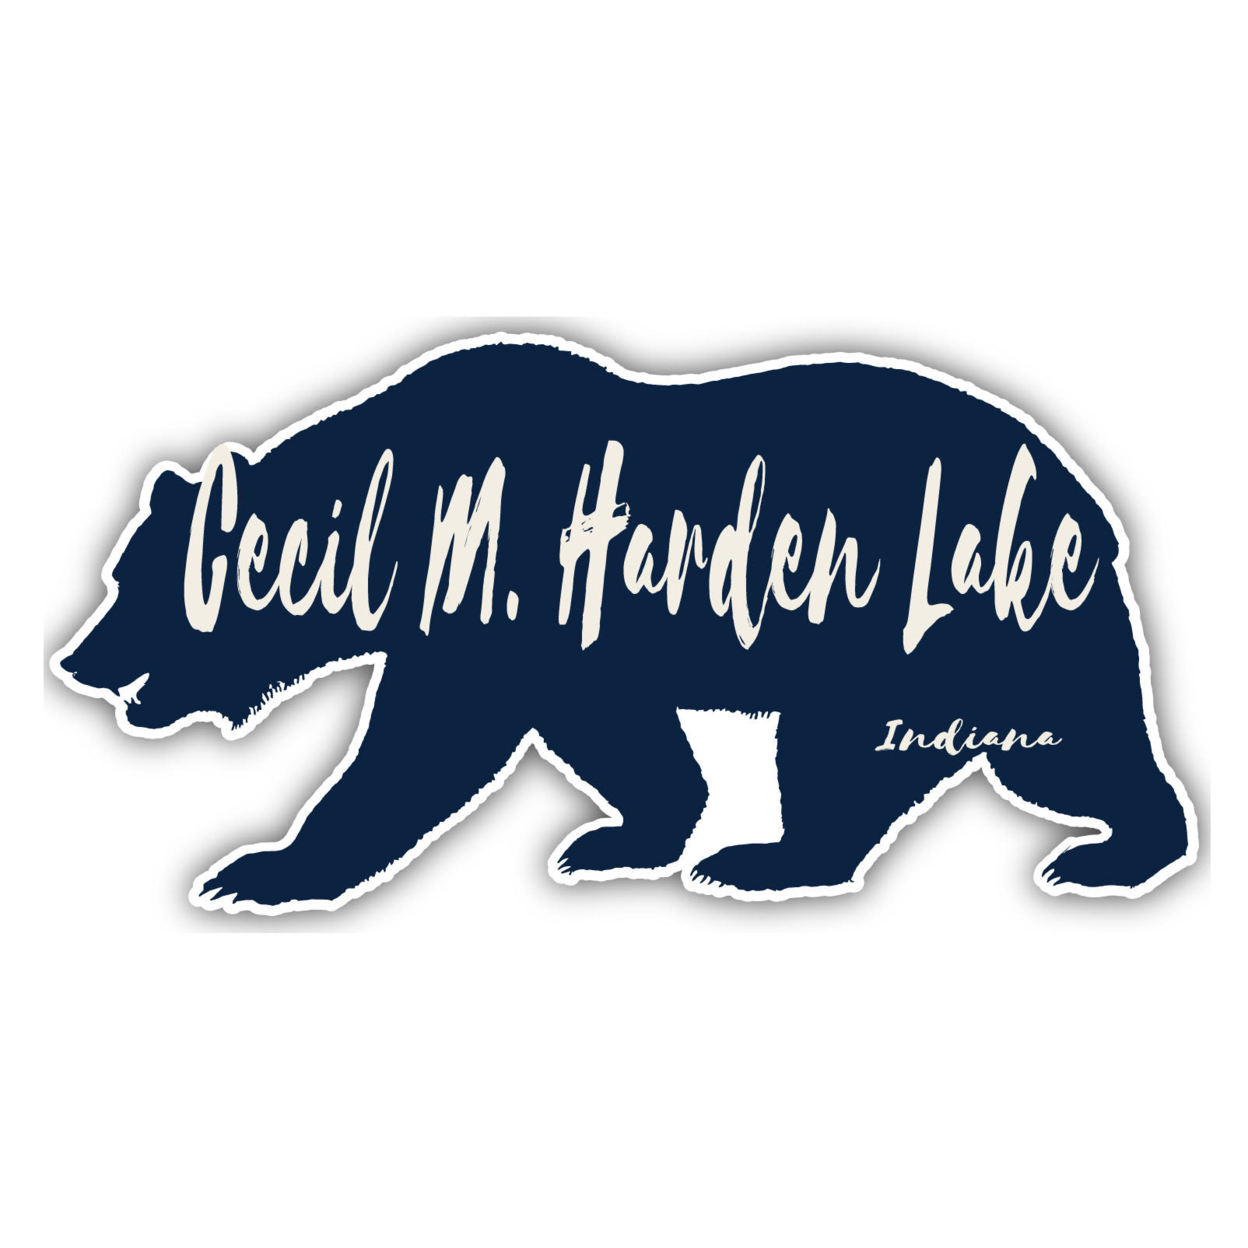 Cecil M. Harden Lake Indiana Souvenir Decorative Stickers (Choose Theme And Size) - 4-Pack, 10-Inch, Bear